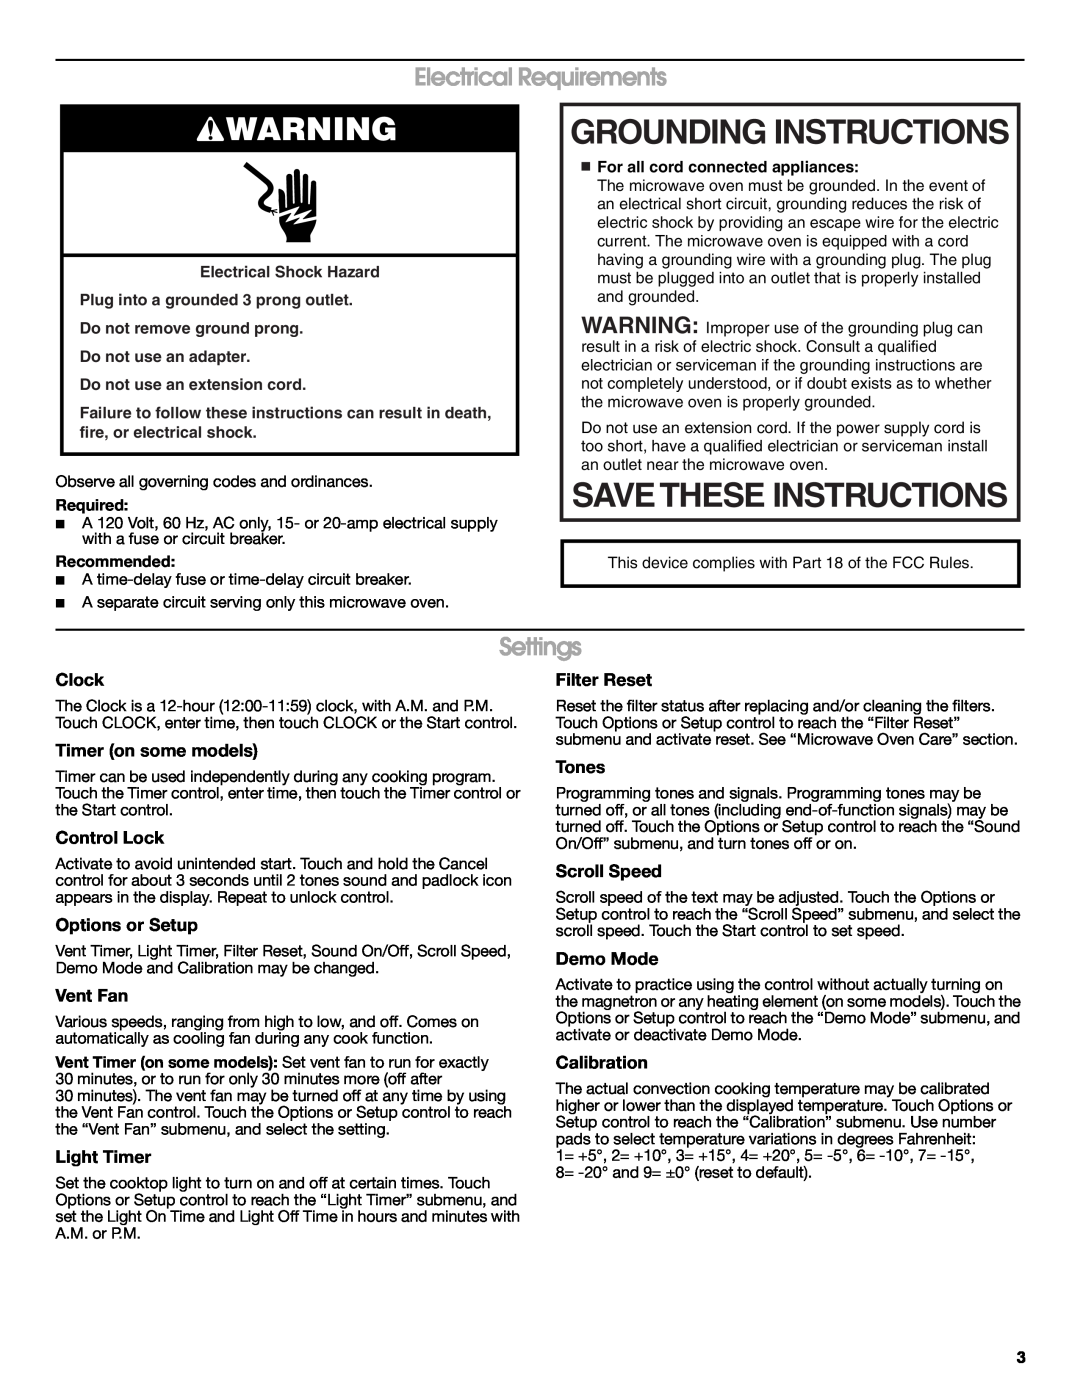 Jenn-Air W10285189B Grounding Instructions, Electrical Requirements, Settings, Save These Instructions 